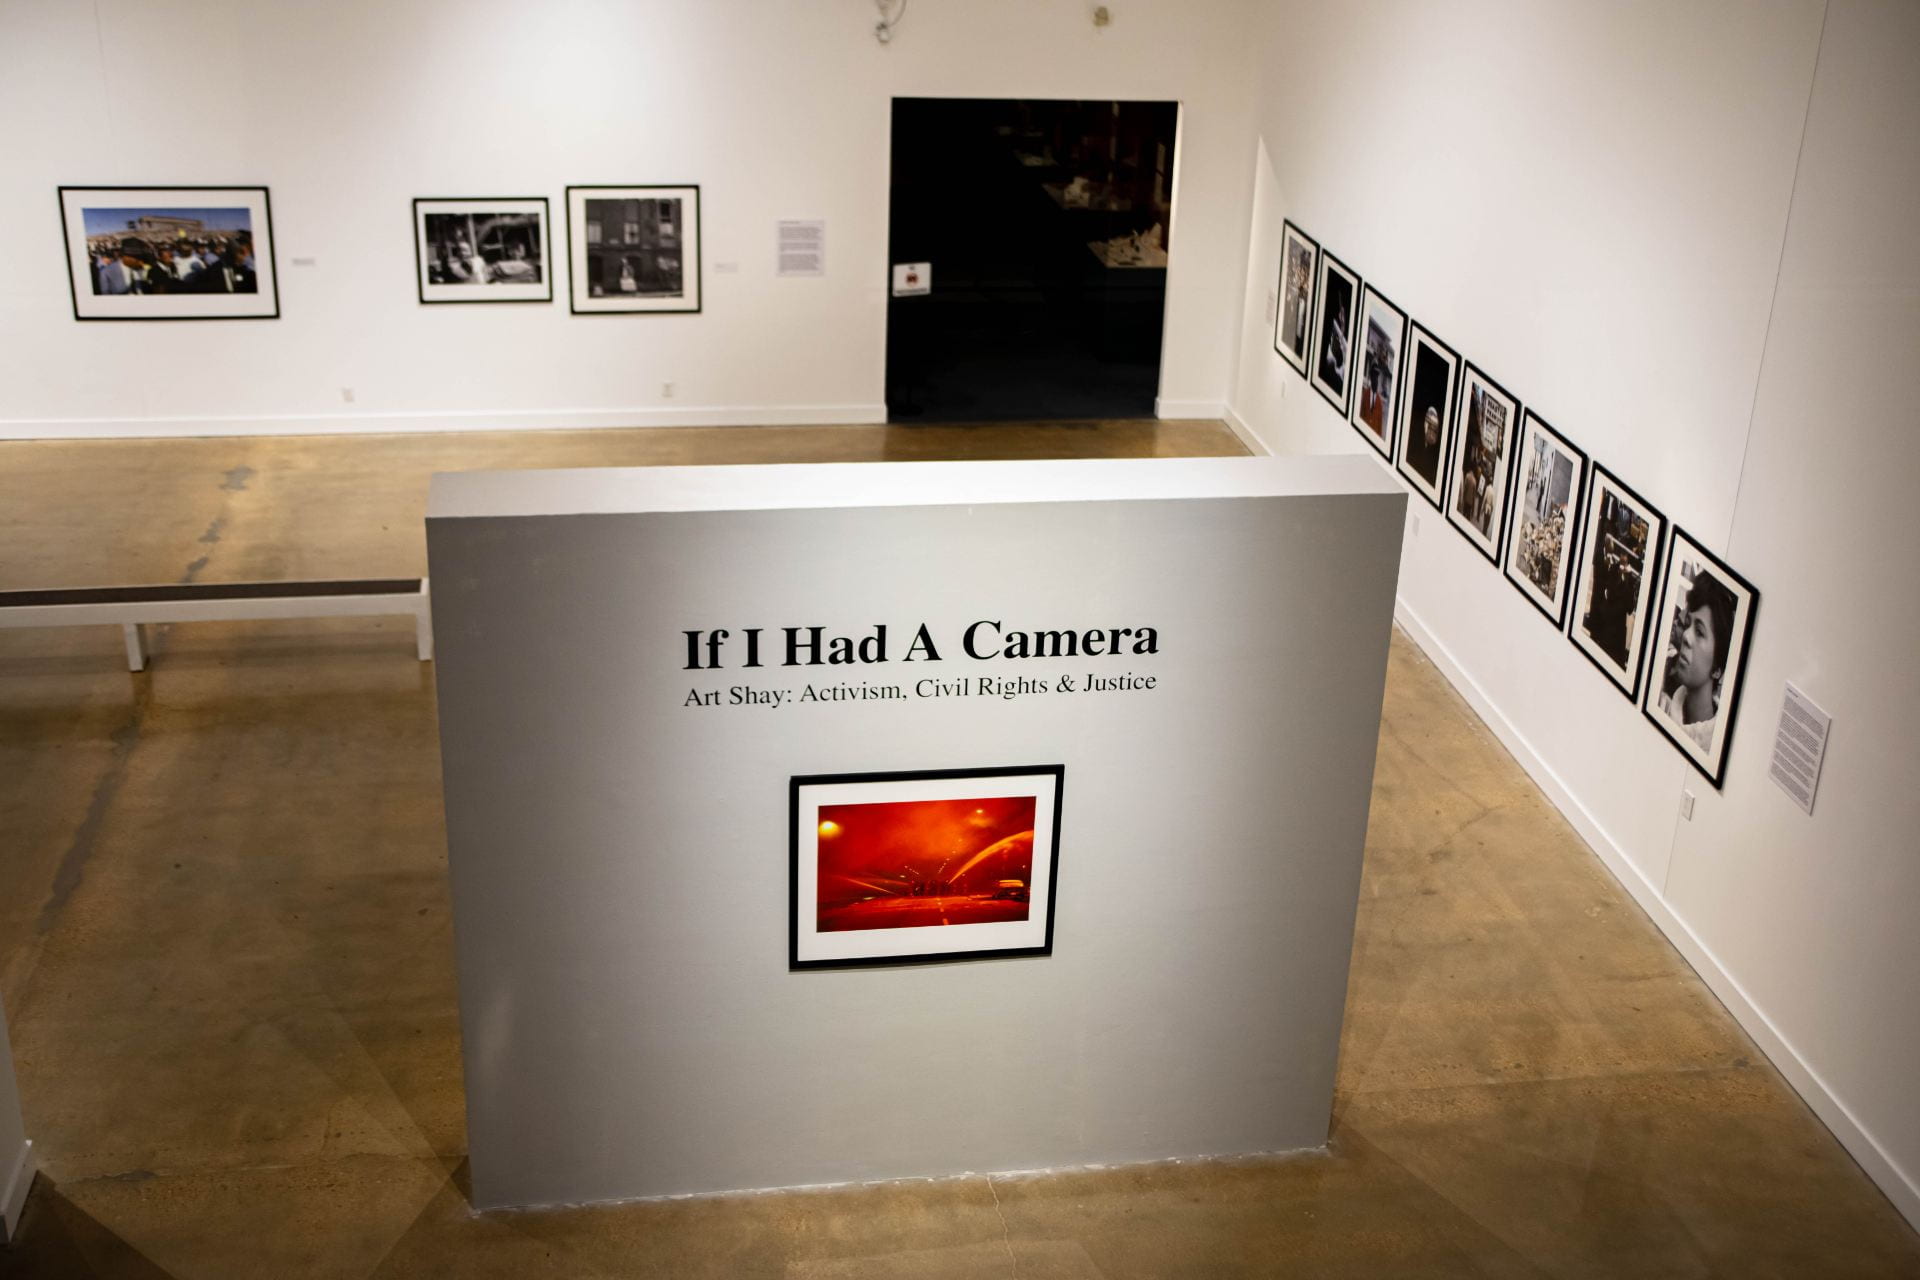 Tonight, Dr. Eric Gellman will host the closing lecture for the AMUM exhibit "If I Had A Camera | Art Shay: Activism, Civil Rights & Justice."